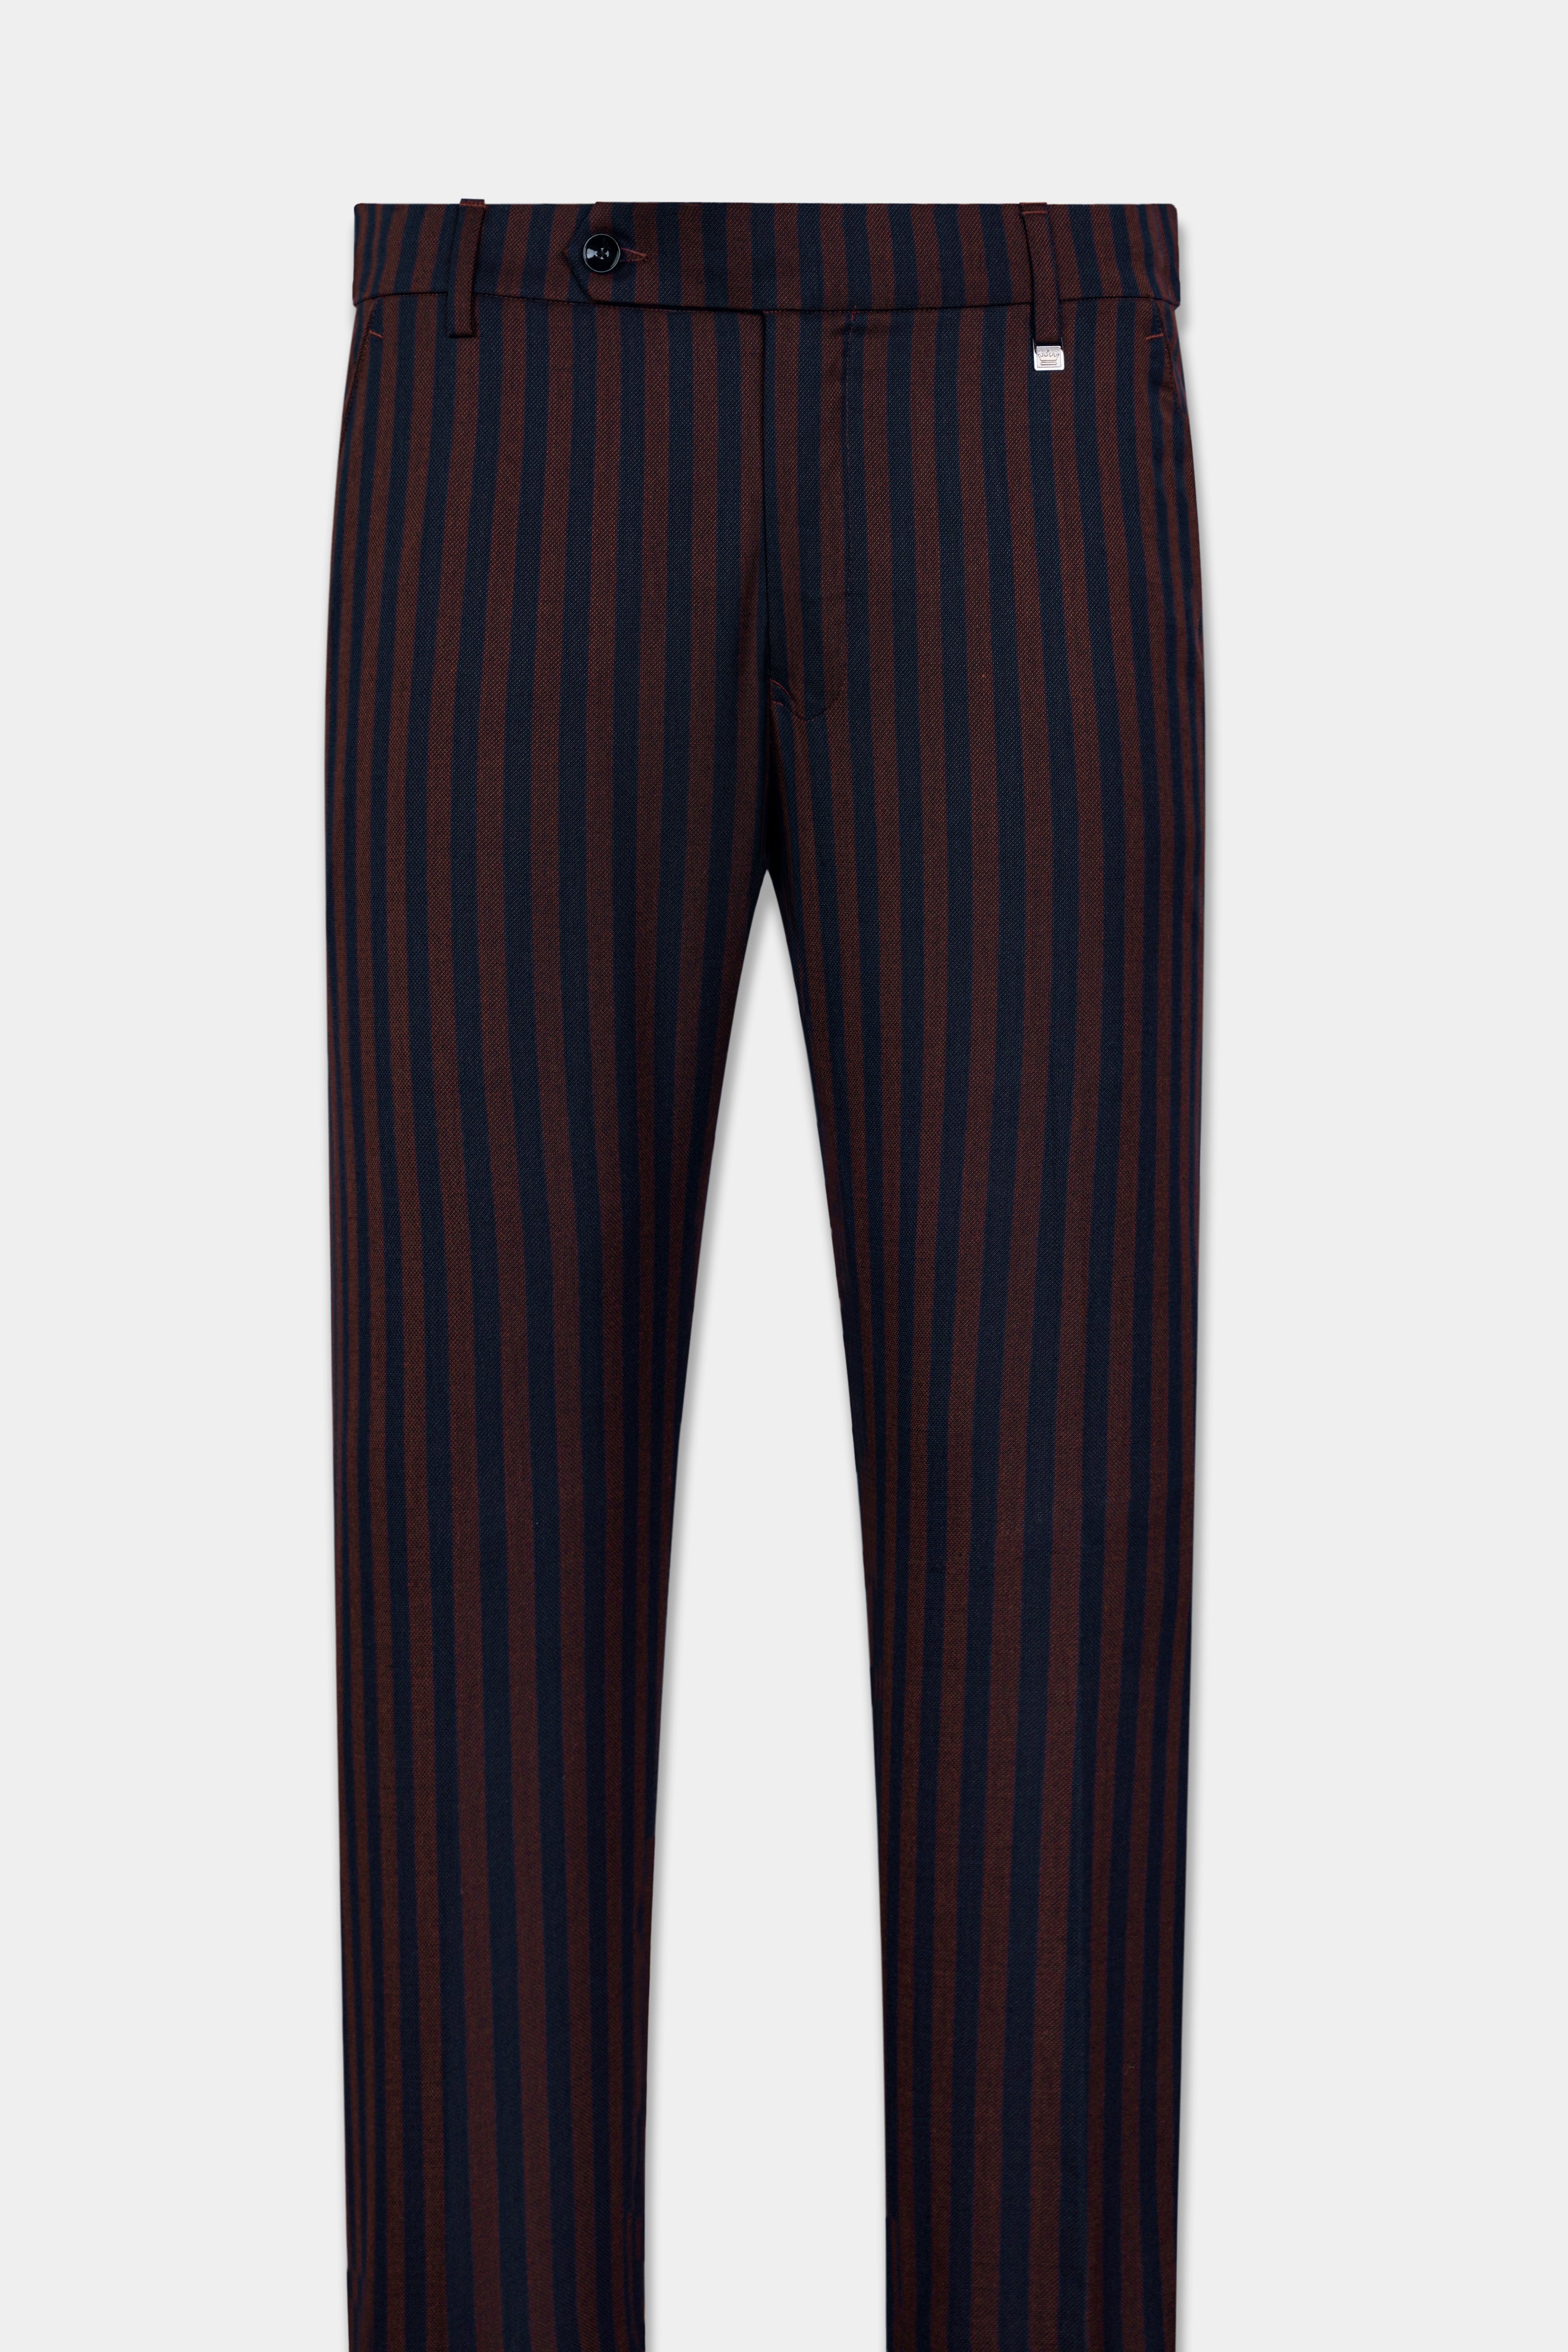 Gondola Brown and Mirage Blue Striped Wool Rich Pant.